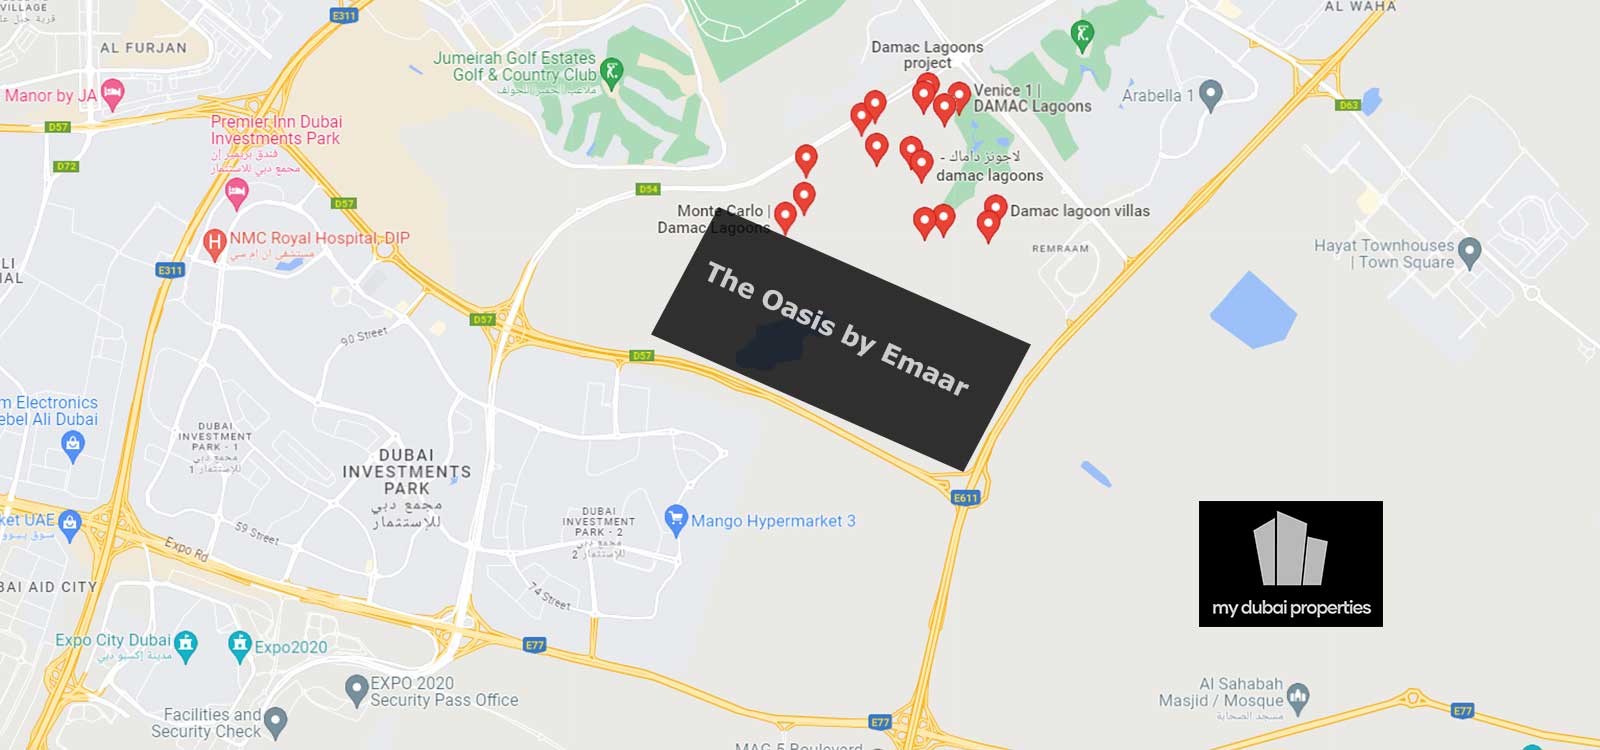 The Oasis by Emaar Location Map